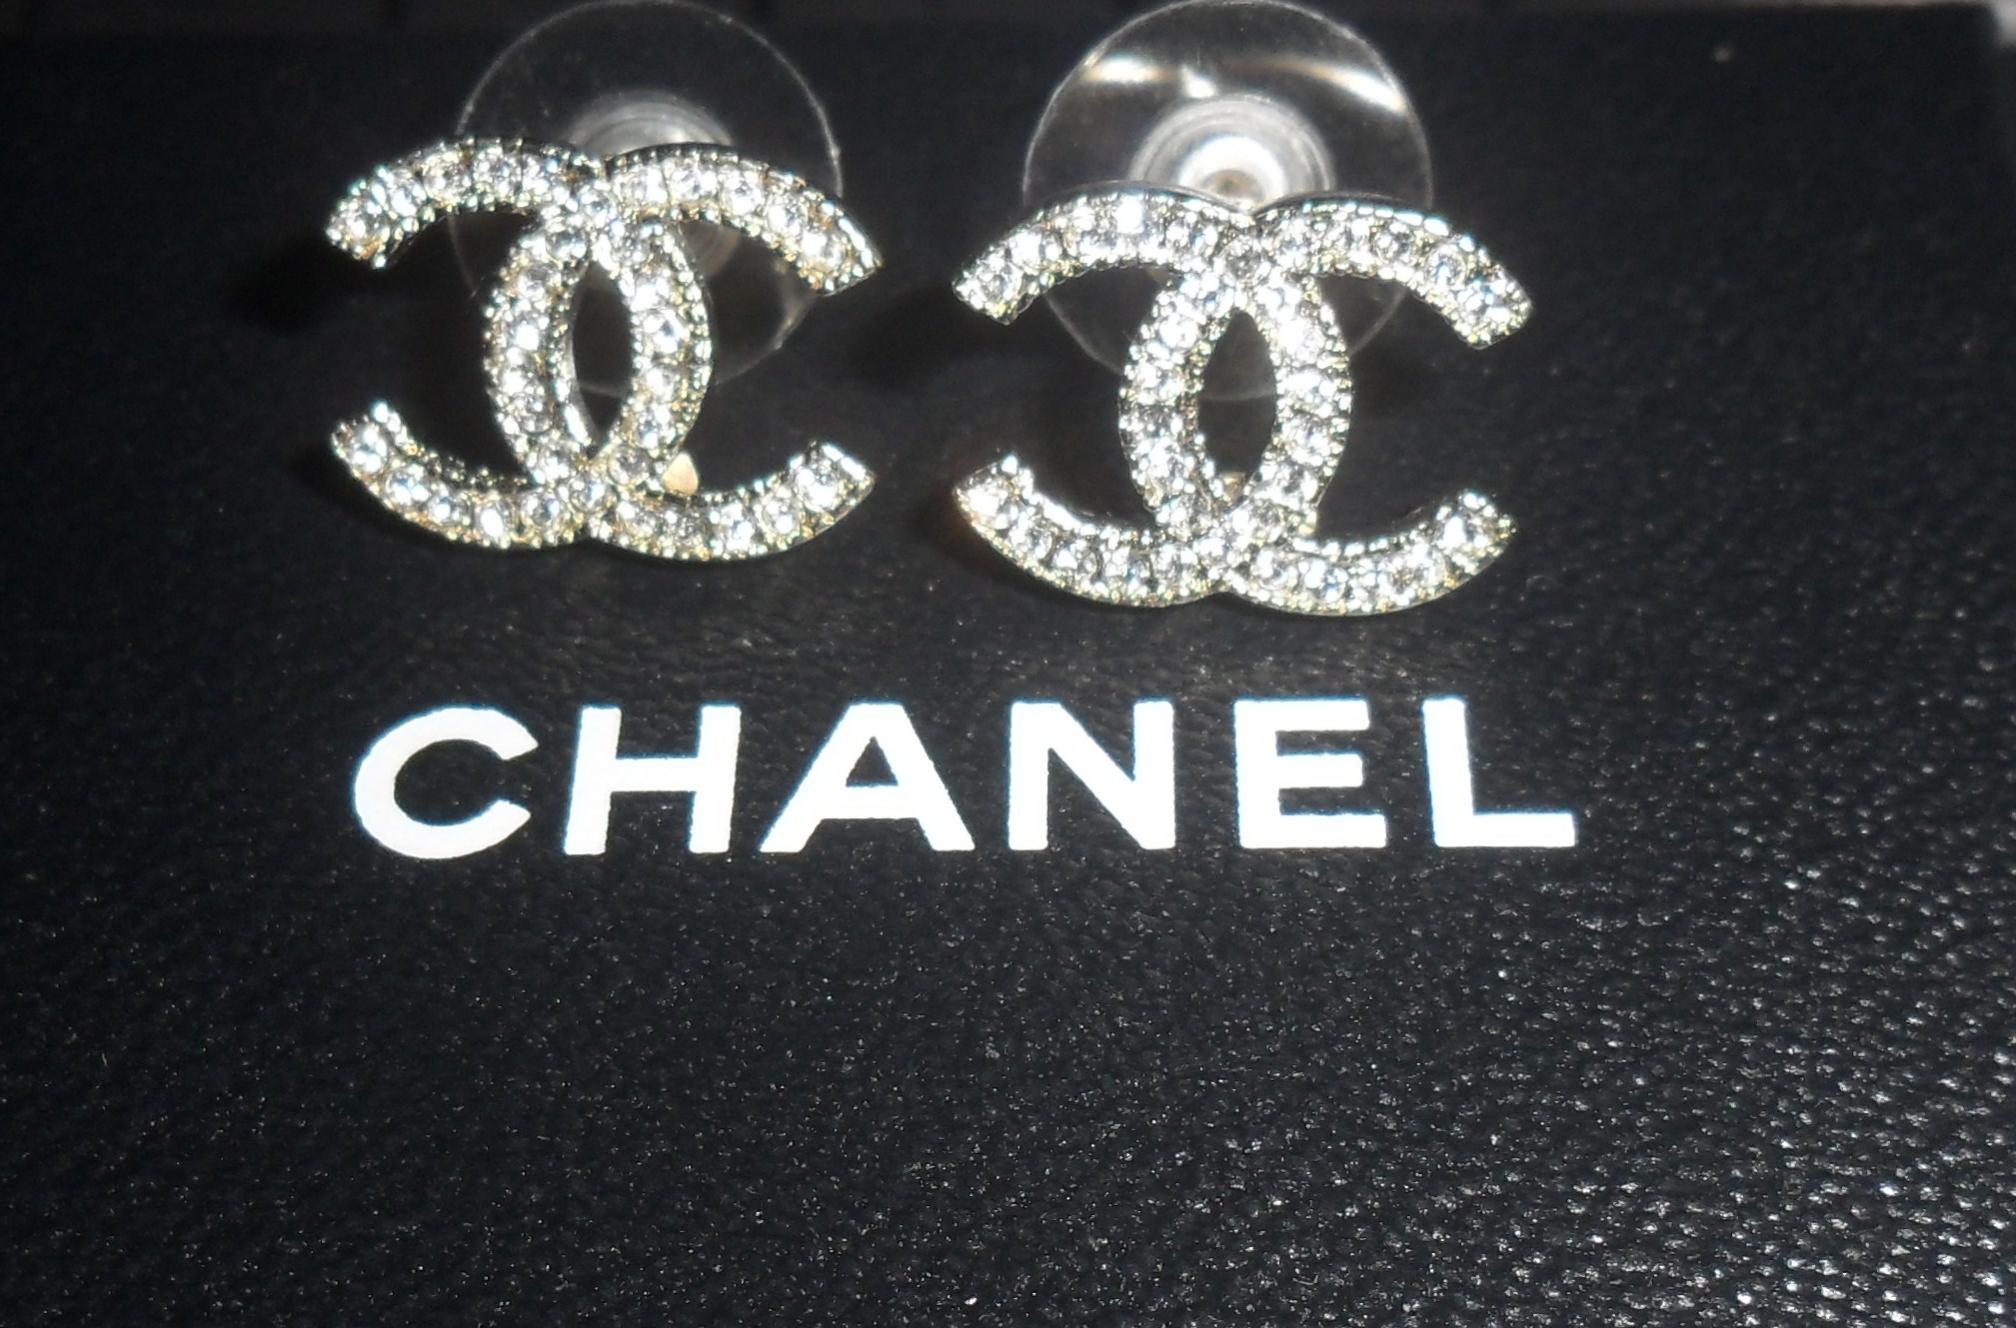 Background Chanel Image Gallery